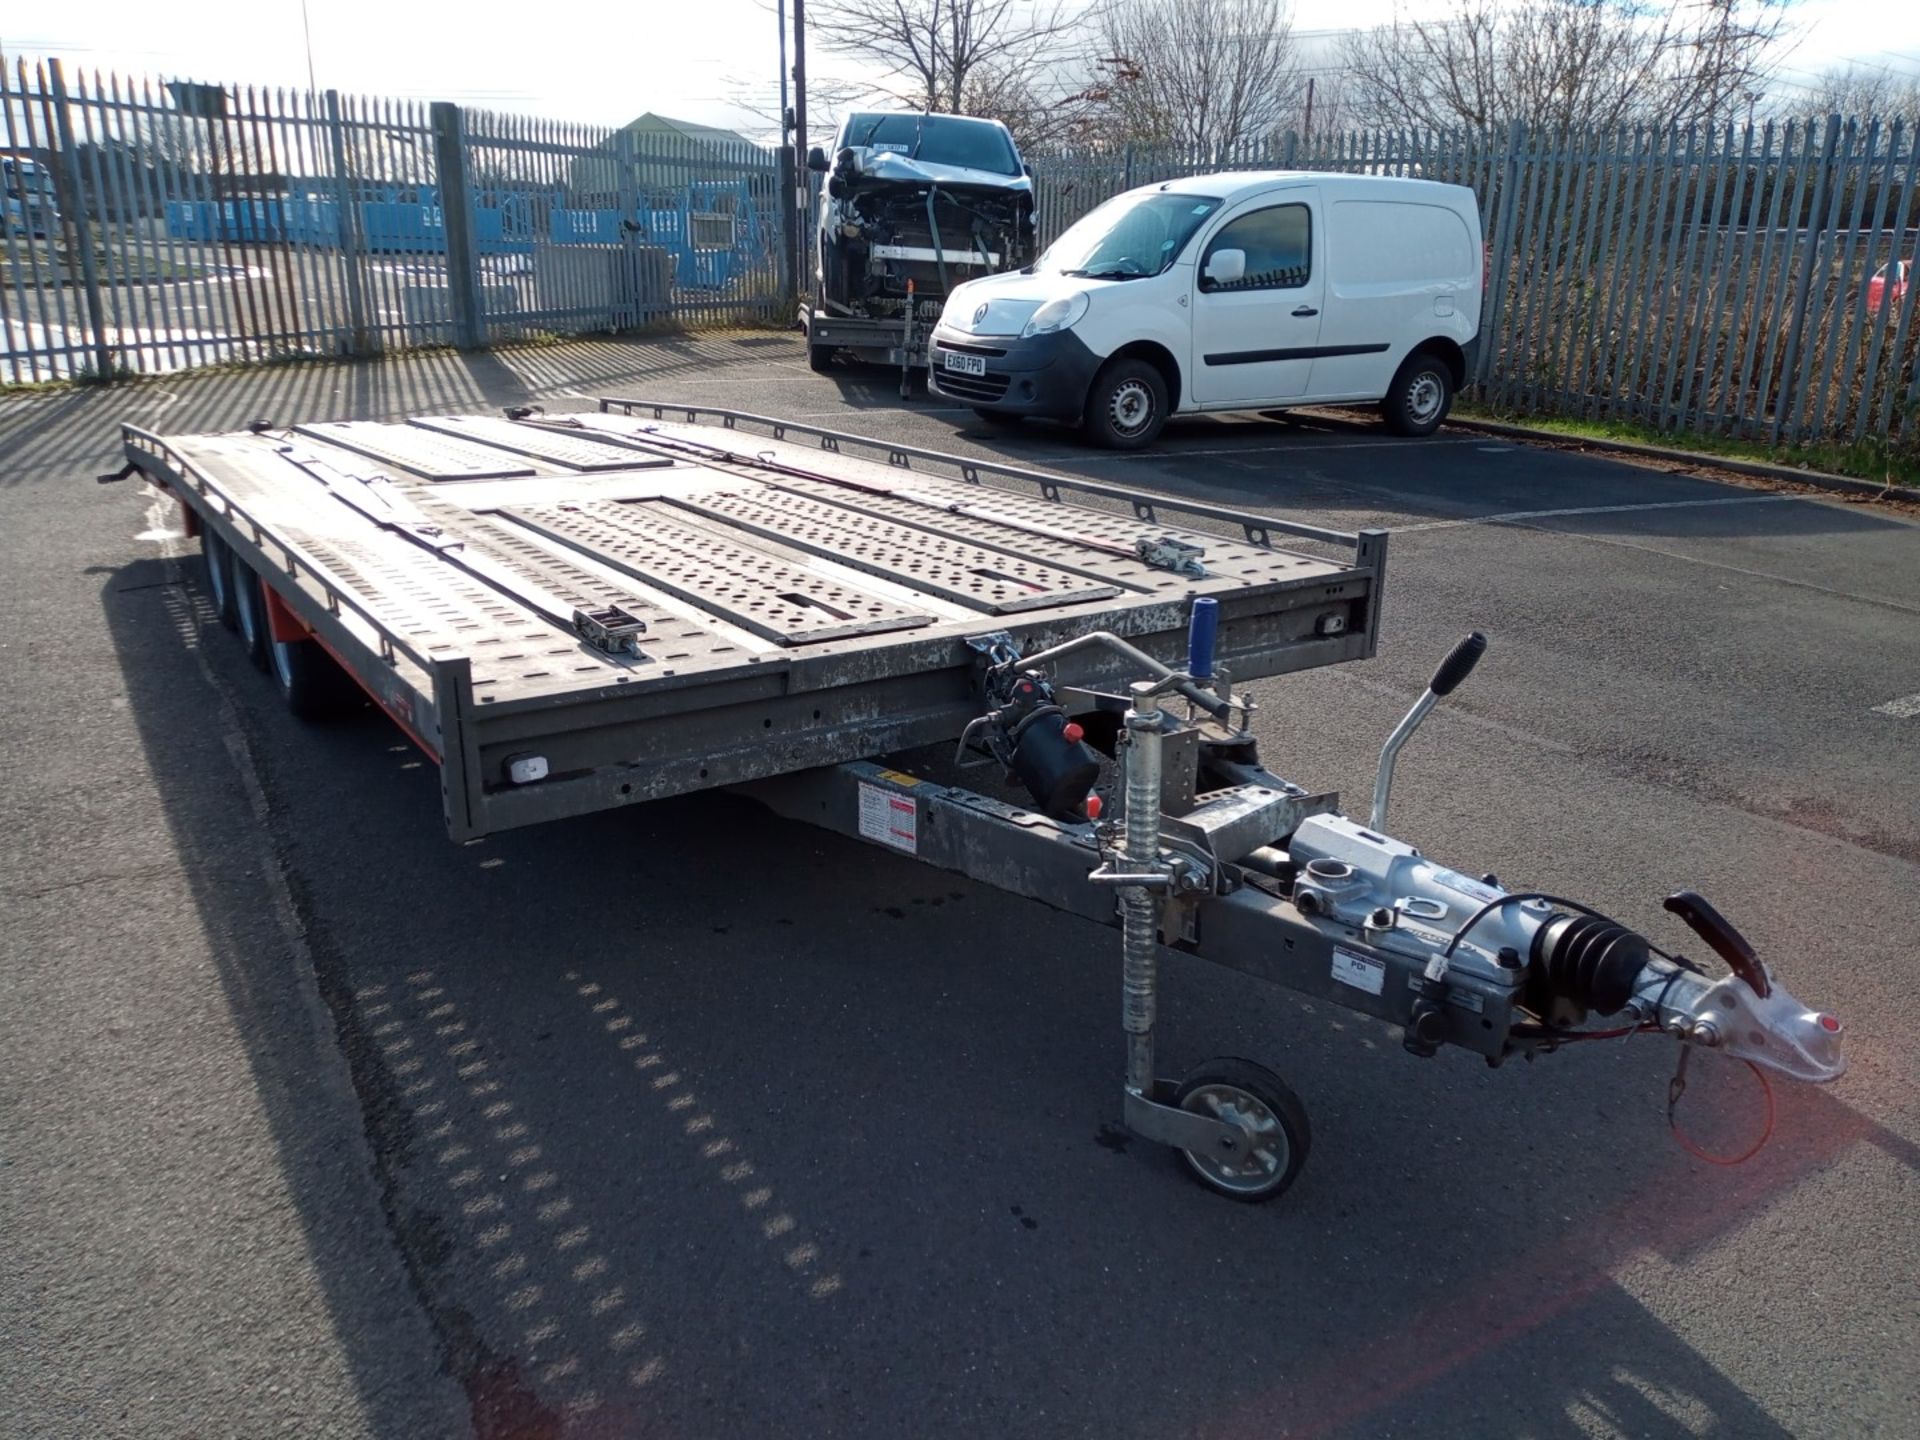 December 2021 Brian James 5m T6 Trailer With Crossover Ramps - Image 2 of 11